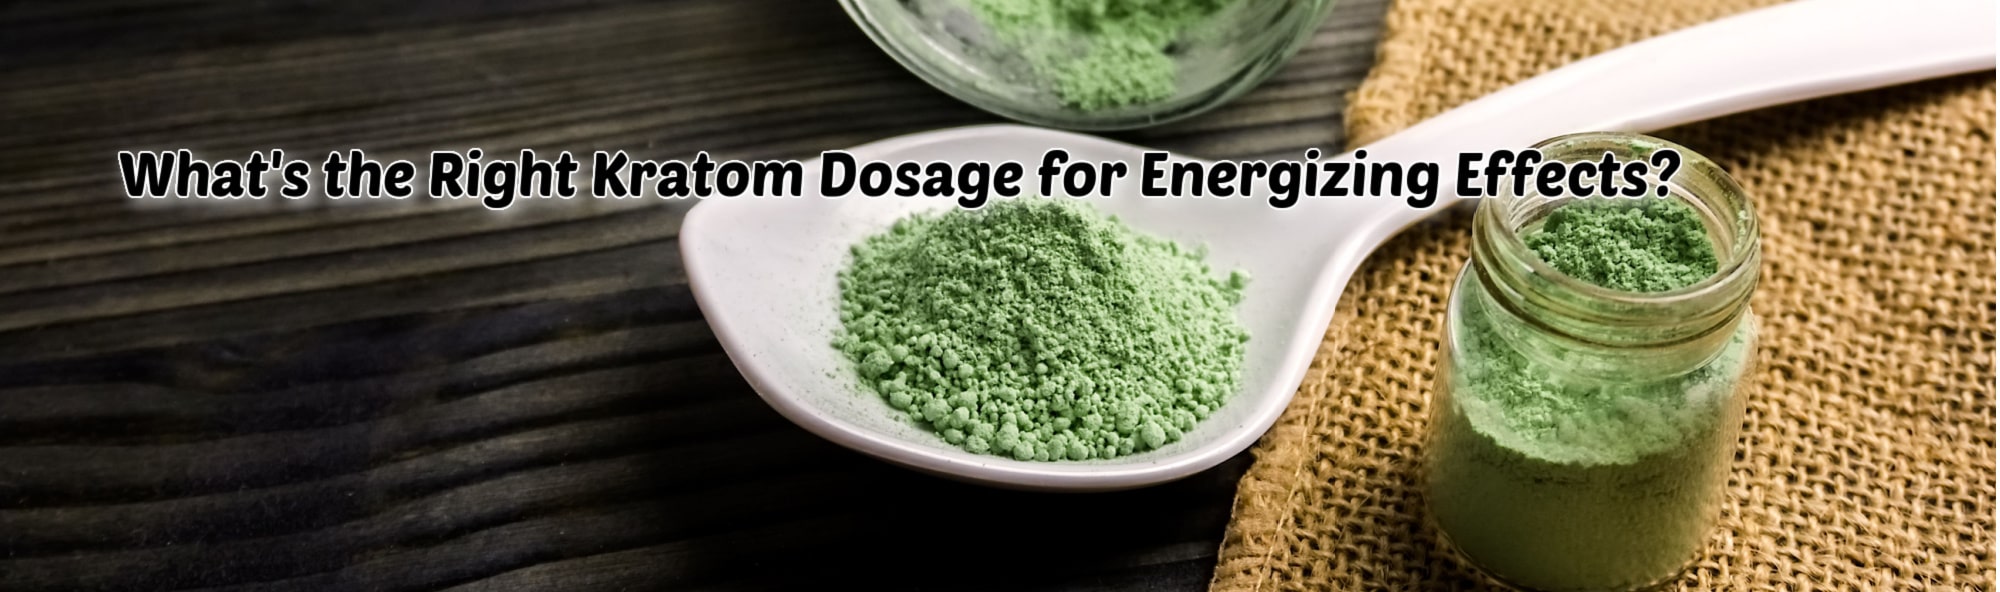 image of whats the right kratom dosage for energizing effects